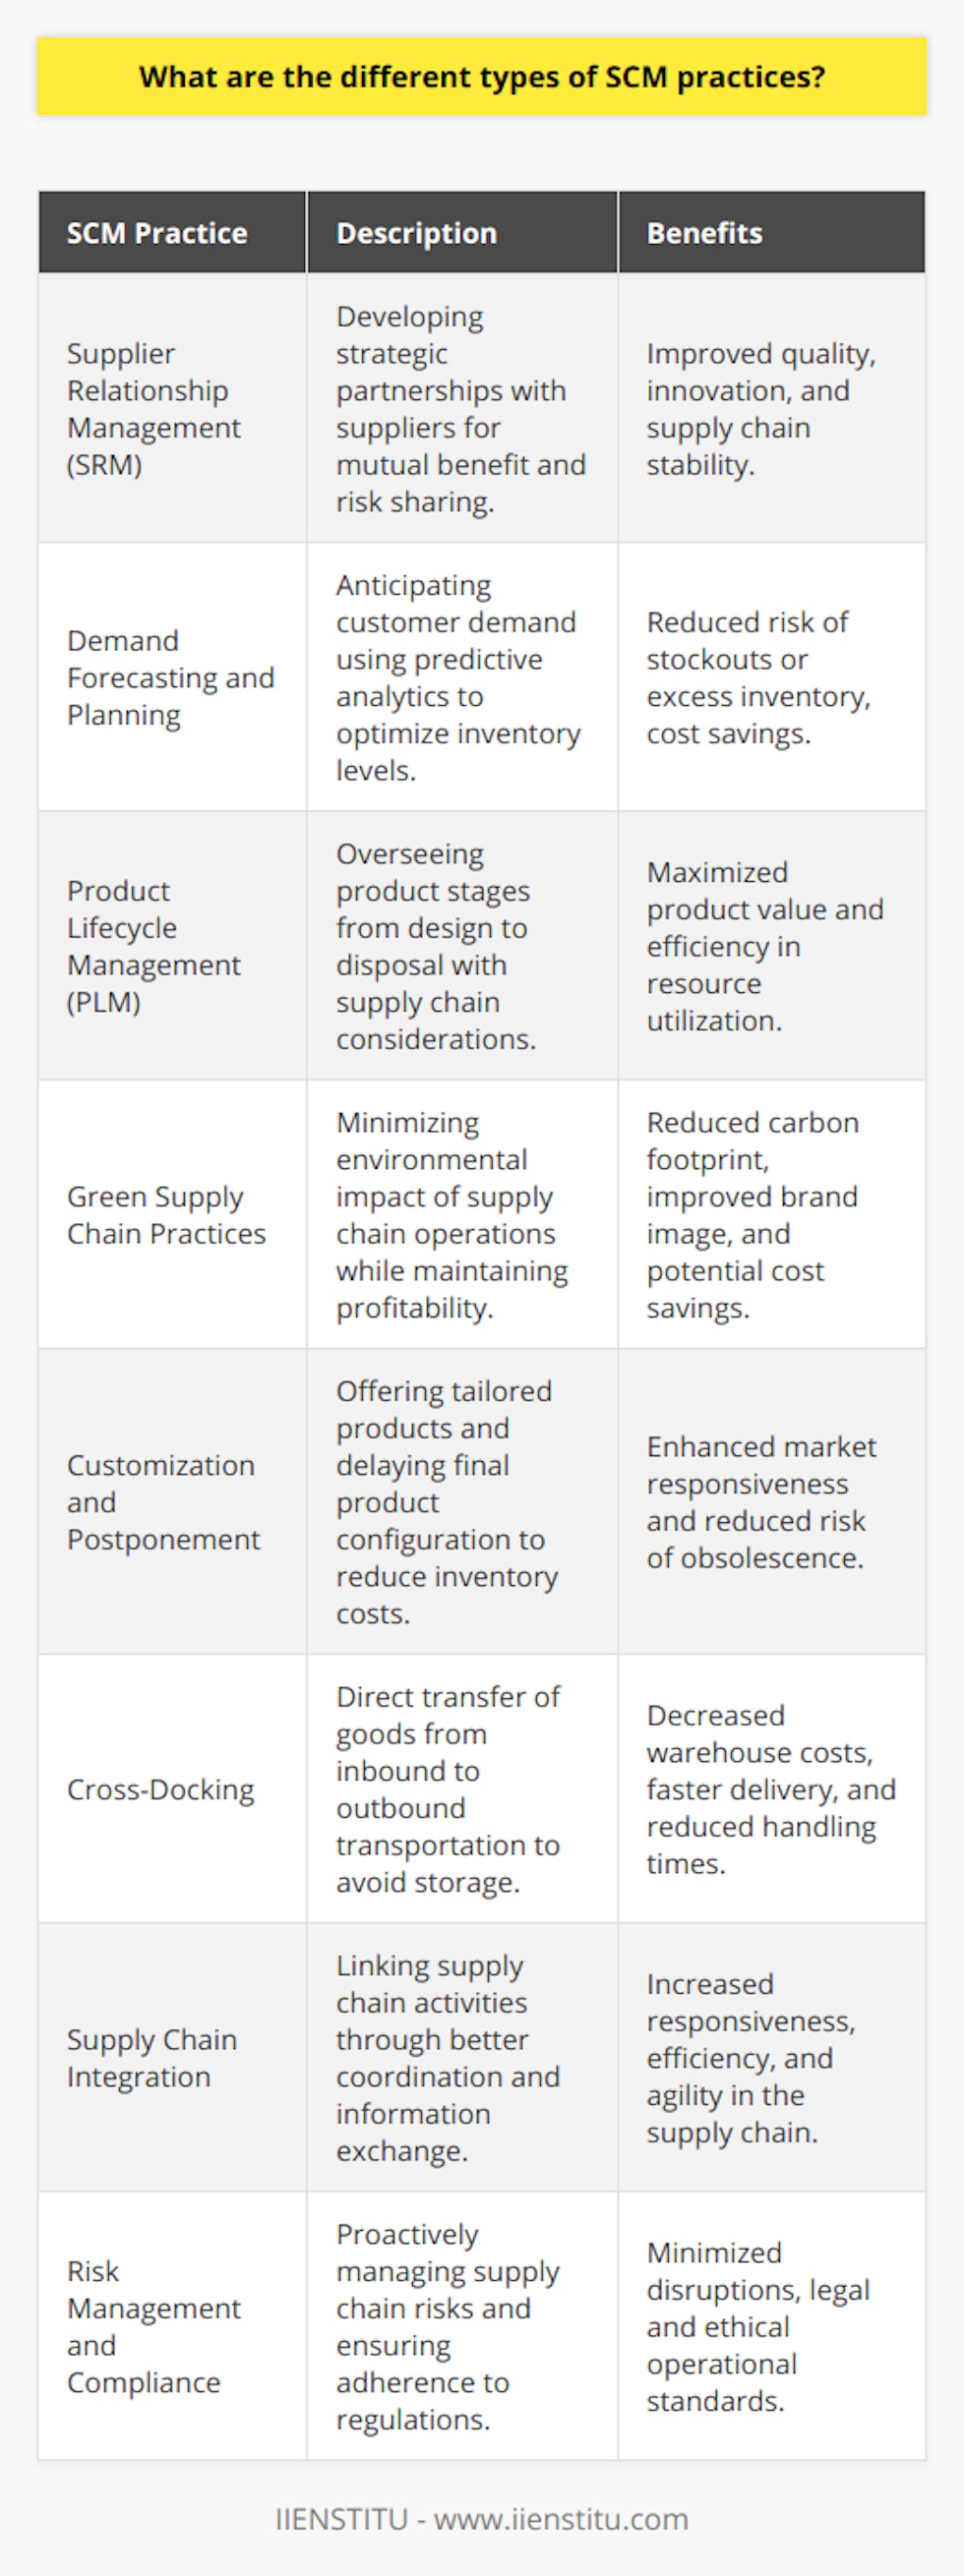 Supply Chain Management (SCM) is an intricate and integral part of modern business, ensuring that products flow efficiently from origination to end consumers. Effective SCM practices are vital for maintaining operational efficiency, improving customer satisfaction, and gaining a competitive advantage. Let's delve into some of the nuanced types of SCM practices that are less frequently discussed but are essential to a well-rounded supply chain strategy.1. Supplier Relationship Management (SRM):Supplier Relationship Management involves cultivating long-term, collaborative relationships with suppliers to develop mutually beneficial strategies, shared objectives, and risk mitigation plans. This practice is about more than just negotiations; it's about creating a network of partnerships that encourage information sharing and joint development projects. SRM helps in stabilizing supply chains and can result in improved quality and innovations.2. Demand Forecasting and Planning:Demand forecasting is critical for anticipating customer requirements. By systematically predicting the future demand for products, businesses can adjust procurement and production strategies accordingly. This SCM practice reduces the risk of stockouts or excess inventory, both of which have cost implications. Advanced methods use predictive analytics and machine learning to improve the accuracy of demand forecasts.3. Product Lifecycle Management (PLM):As products go through different stages from conception to discontinuation, PLM integrates people, processes, business systems, and data to manage the product lifecycle efficiently. This SCM practice ensures that every phase, including design, manufacture, service, and disposal of the product, is conducted with supply chain implications in mind, which maximizes the product value for both the company and its customers.4. Green Supply Chain Practices:Sustainability is gaining prominence in SCM. Green supply chain practices involve designing and implementing supply chain processes that minimize environmental impacts while also being economically viable. This includes actions such as reducing energy consumption, selecting eco-friendly materials, optimizing logistics to lower emissions, and ensuring end-of-life recycling or disposal of products is environmentally sound.5. Customization and Postponement:Customization allows companies to provide tailored products to meet specific customer needs. Postponement is a related SCM practice where the final configuration of a product is delayed until the last possible moment. This strategy is useful in reducing inventory holding costs and improving response to market-specific demand, which in turn minimizes the risk of stock obsolescence.6. Cross-Docking:Cross-docking is an innovative logistics practice within SCM where incoming materials are unloaded directly onto outbound transport vehicles, with little to no storage in between. This not only speeds up the shipment process but reduces warehousing costs and minimizes handling times.7. Supply Chain Integration:A well-integrated supply chain connects different supply chain activities through improved information sharing and coordination among all parties involved. Integration can be vertical with suppliers and customers or horizontal, involving collaborations with competitors or companies in related industries. Enhanced integration often results in more synchronized supply chains that can rapidly respond to changes in demand or supply.8. Risk Management and Compliance:Finally, as supply chains become increasingly global, they are exposed to a myriad of risks such as geopolitical tensions, natural disasters, and regulatory changes. Proactive risk management practices include identifying potential disruptions, assessing their impact, and developing strategies to mitigate these risks. Compliance with local and international regulations is also crucial in managing a global supply chain, ensuring operational legality and ethical standards are met.Practitioners and academic bodies such as IIENSTITU often explore and refine these SCM practices, addressing the dynamic challenges faced by modern supply chains. While some information on these topics may be available on the internet, detailed insights on their strategic application and evolution tend to be less common, residing within specialized courses, industry reports, and professional consultancy services. Effective SCM practices are thus a mix of well-known and less-publicized strategies, each significant in building a resilient and responsive supply chain ecosystem.